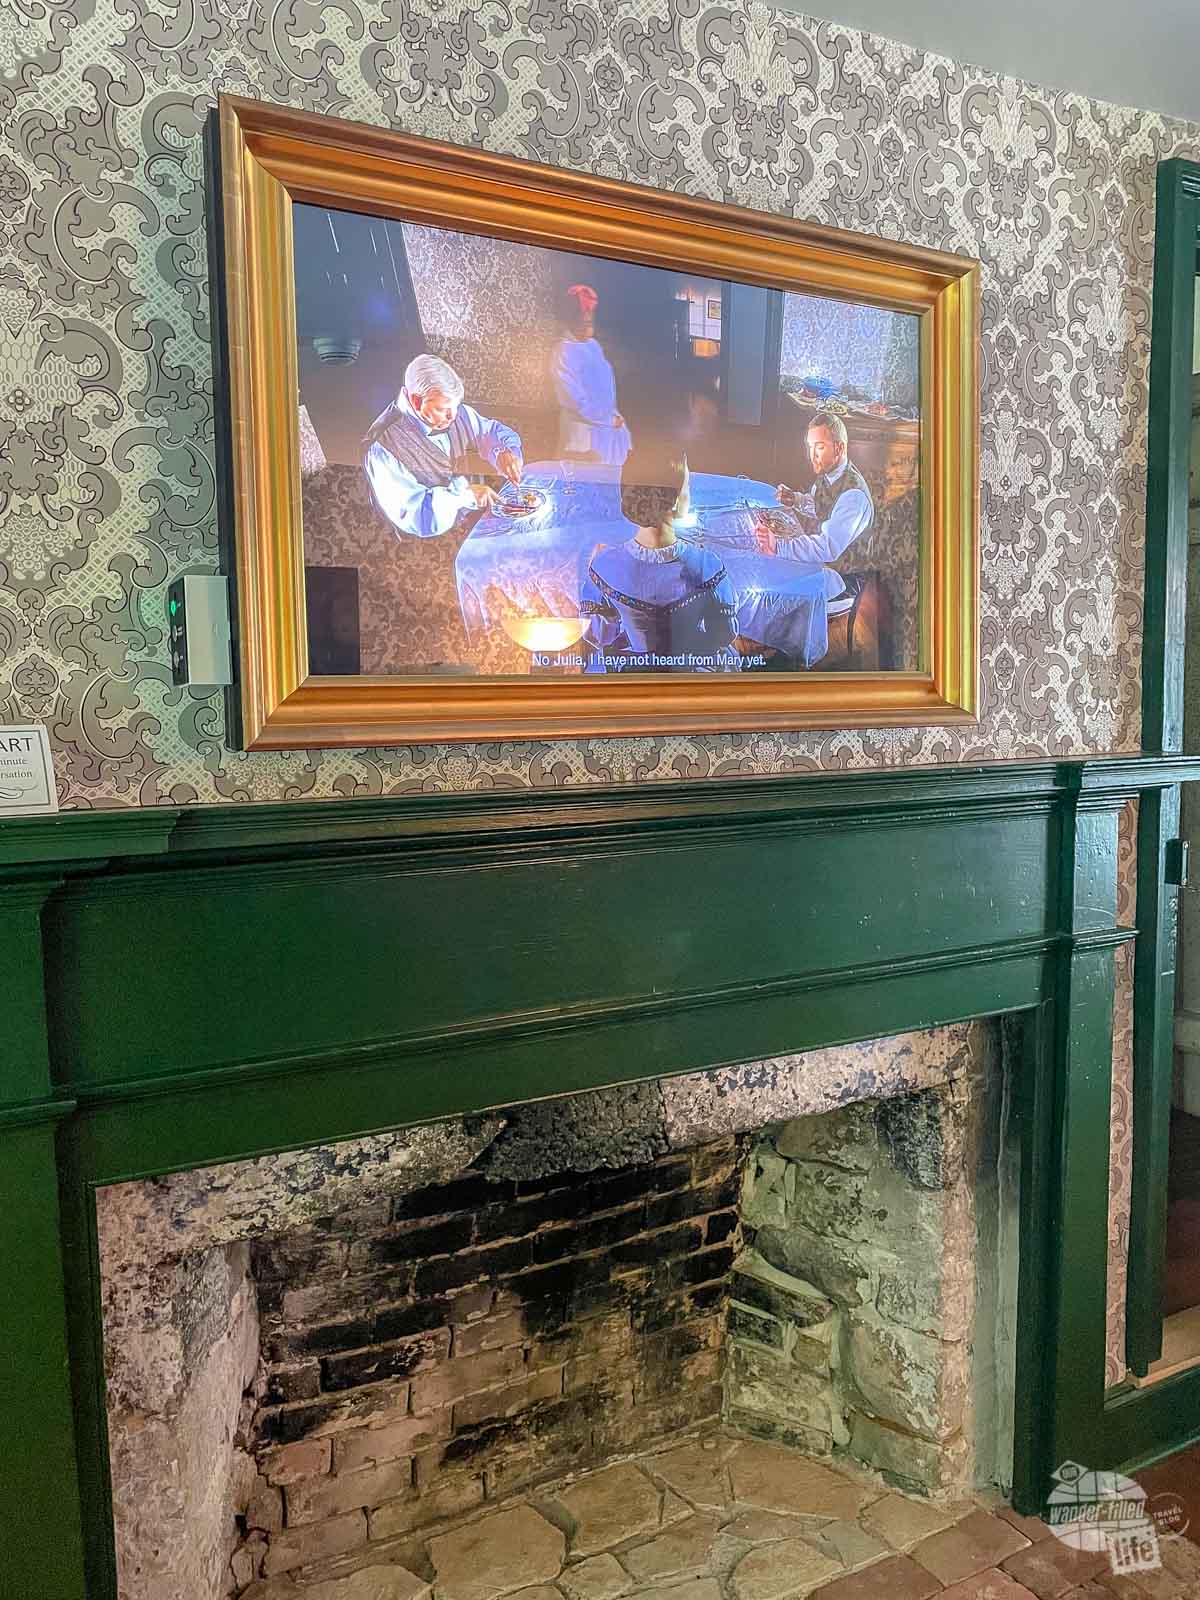 The Grant National Historic Site made good use of video picture frames to tell the story of the house.